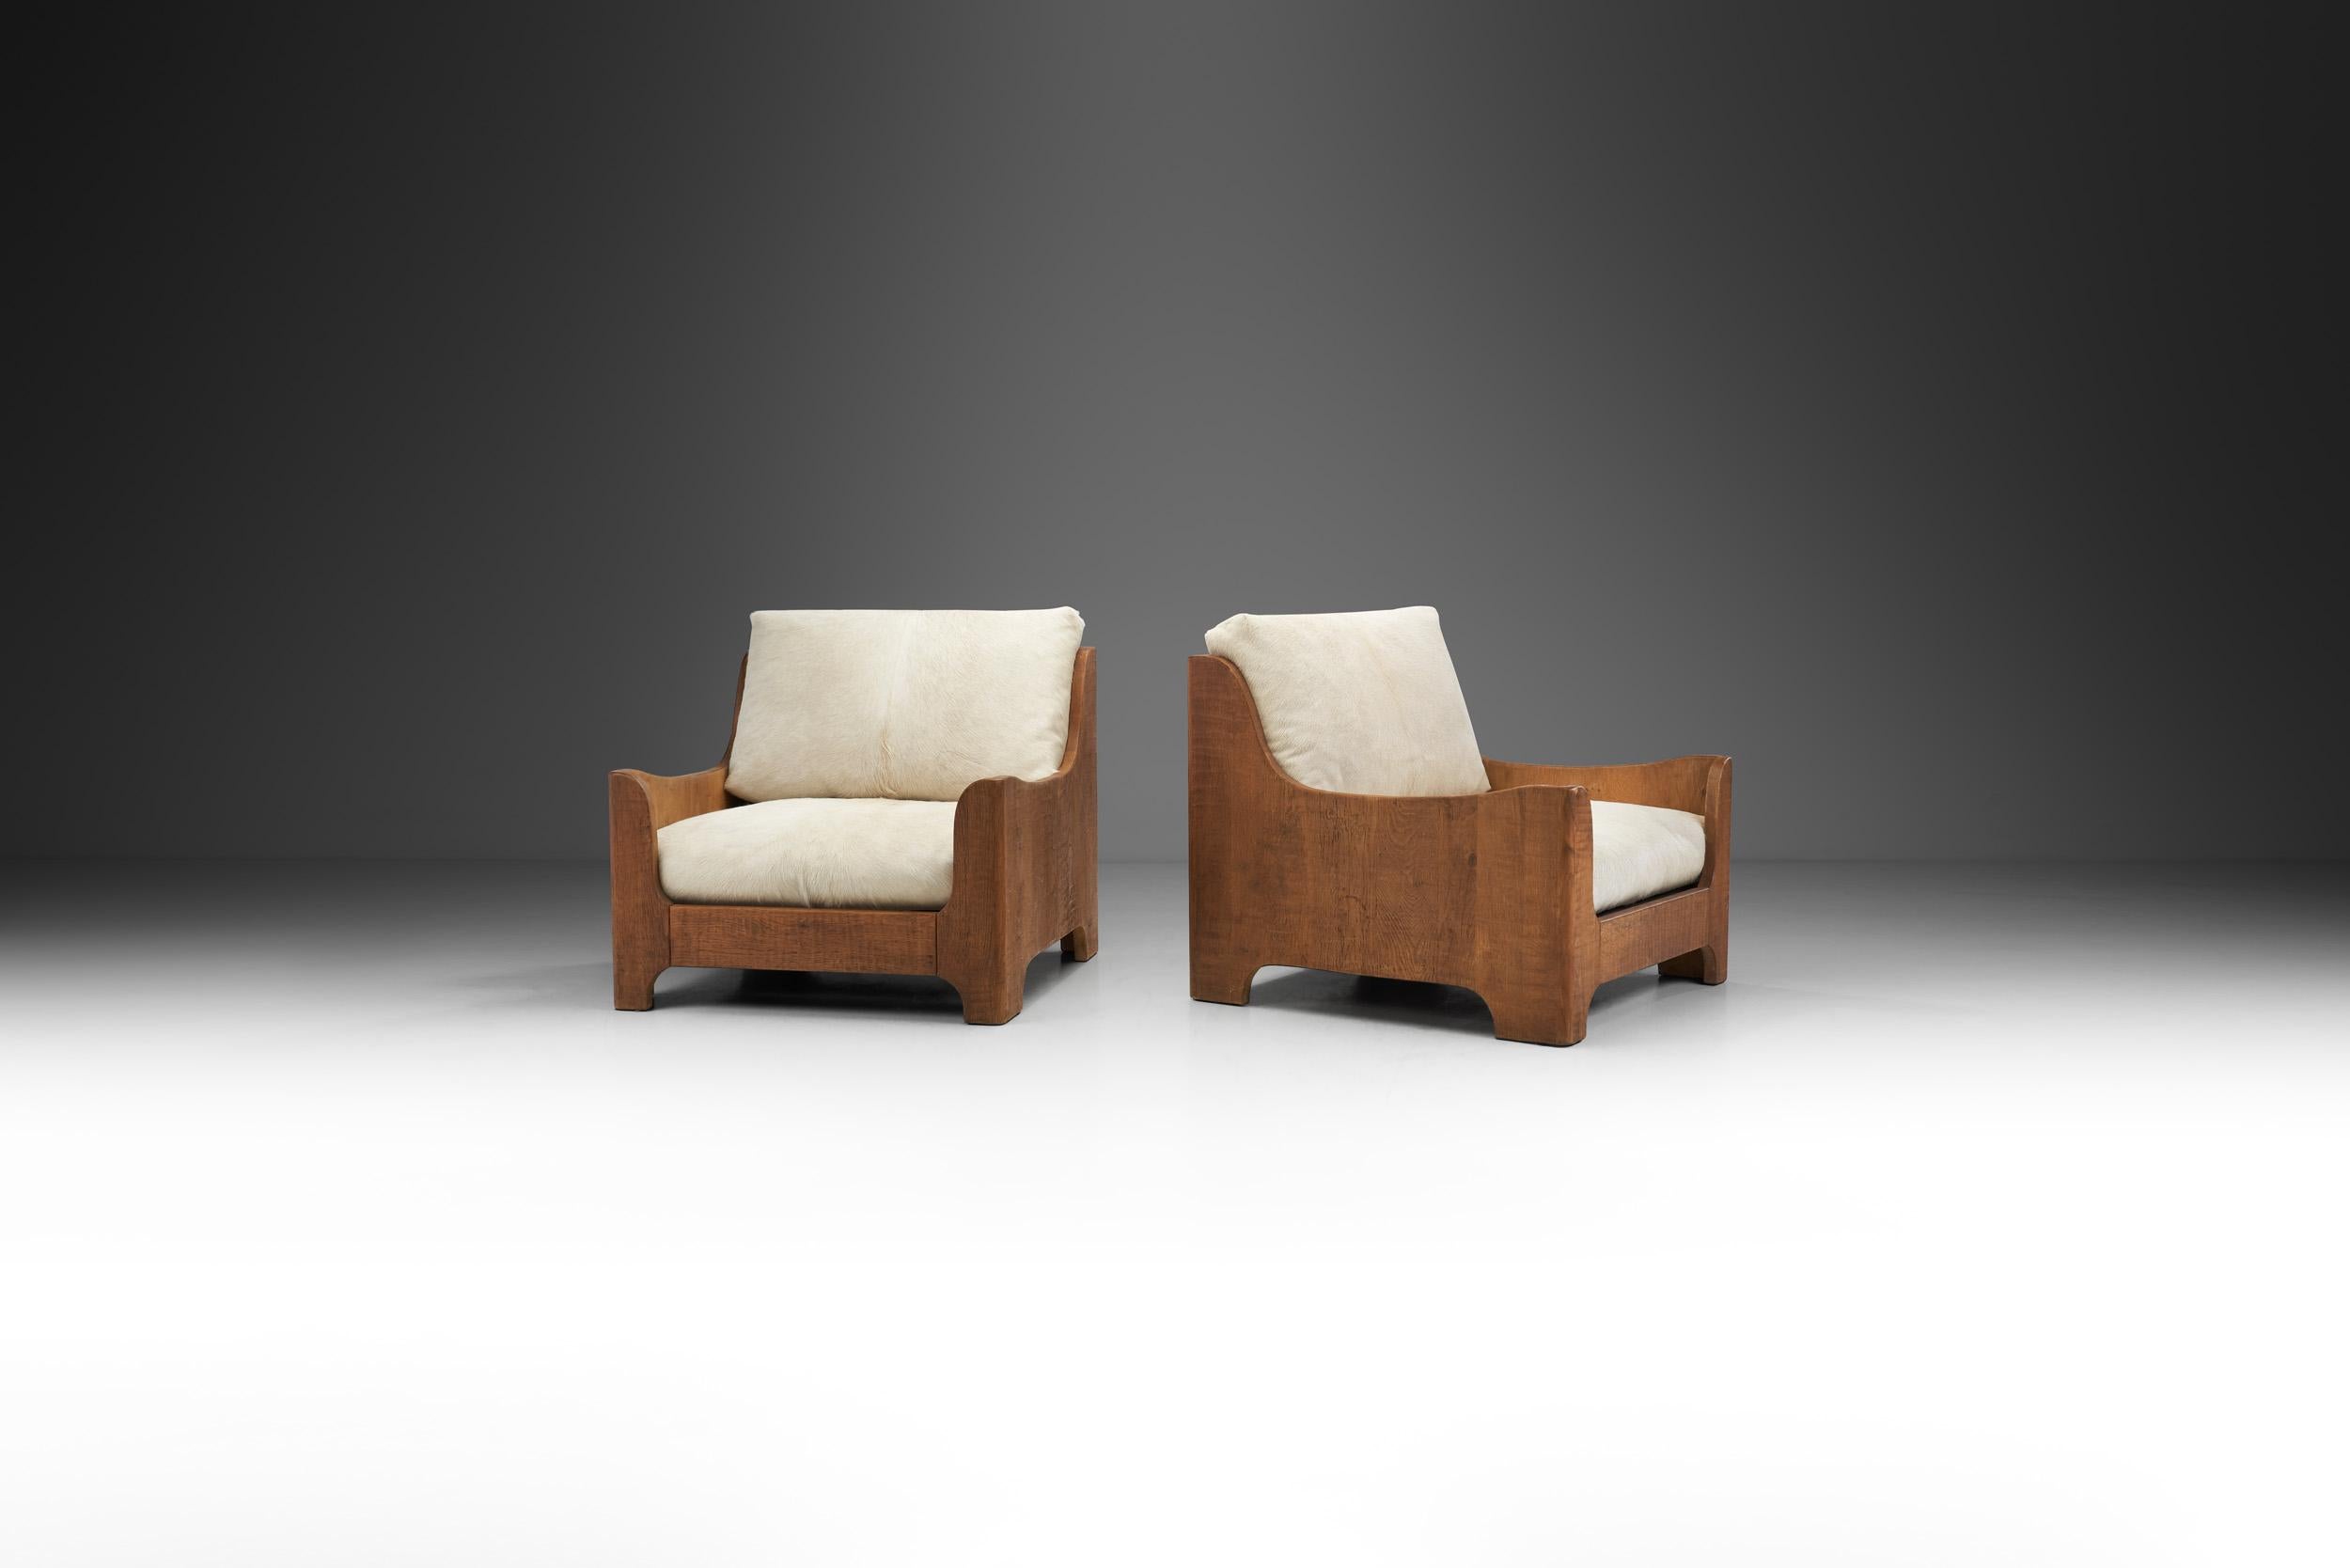 There is a clear decorative feel to these lounge chairs with indulgent shaping and a sophisticated, sartorial attitude.? Not only the quality is apparent, but also the subtle influences of the Art Deco era.

Defined by the style themes of the